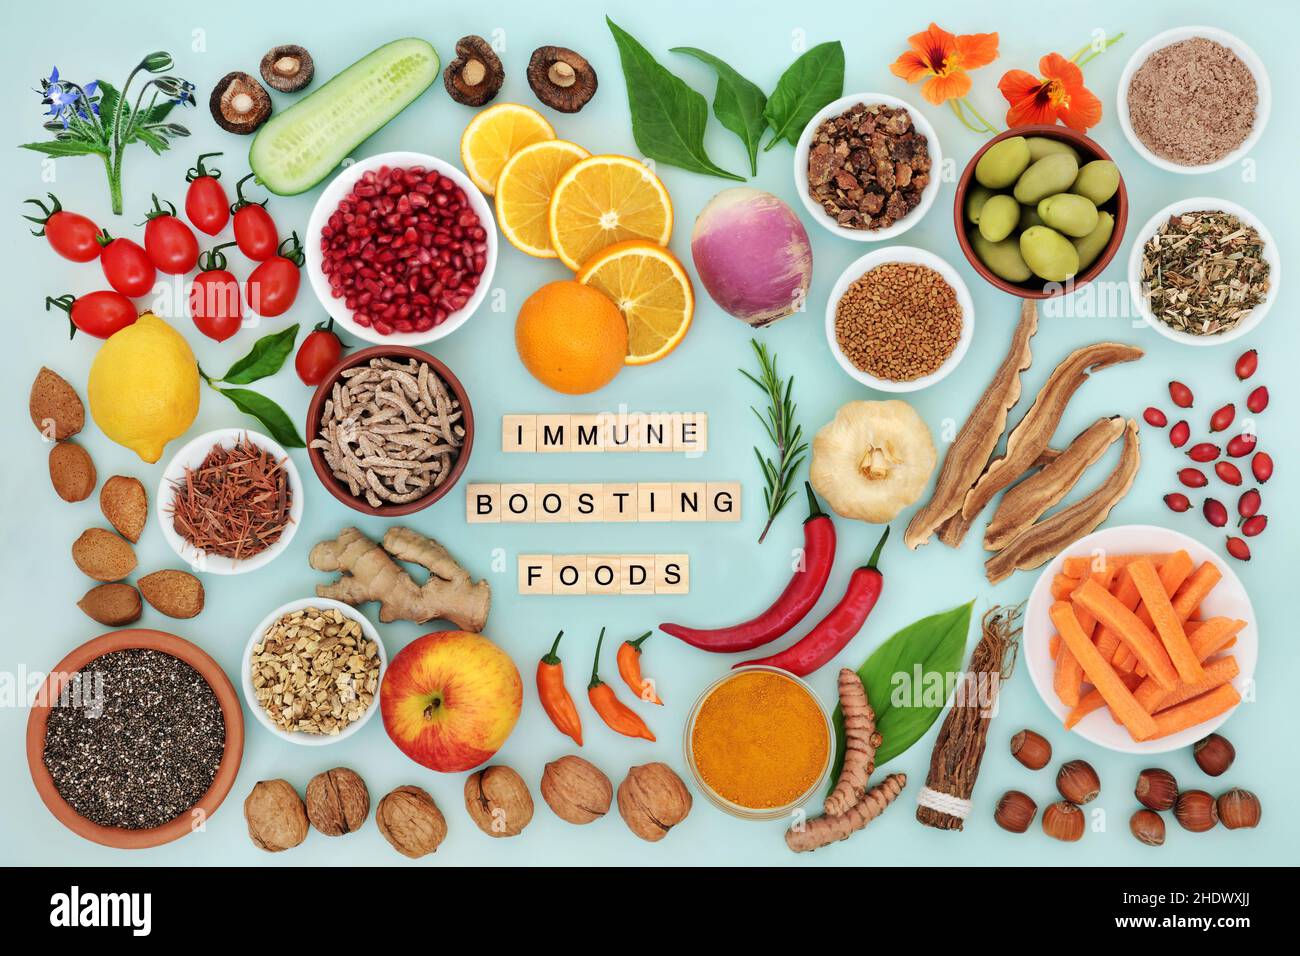 Immune system boosting vegan food for good health with vegetables, fruit, medicinal herbs and spice. High in antioxidants, anthocyanins, fibre. Stock Photo